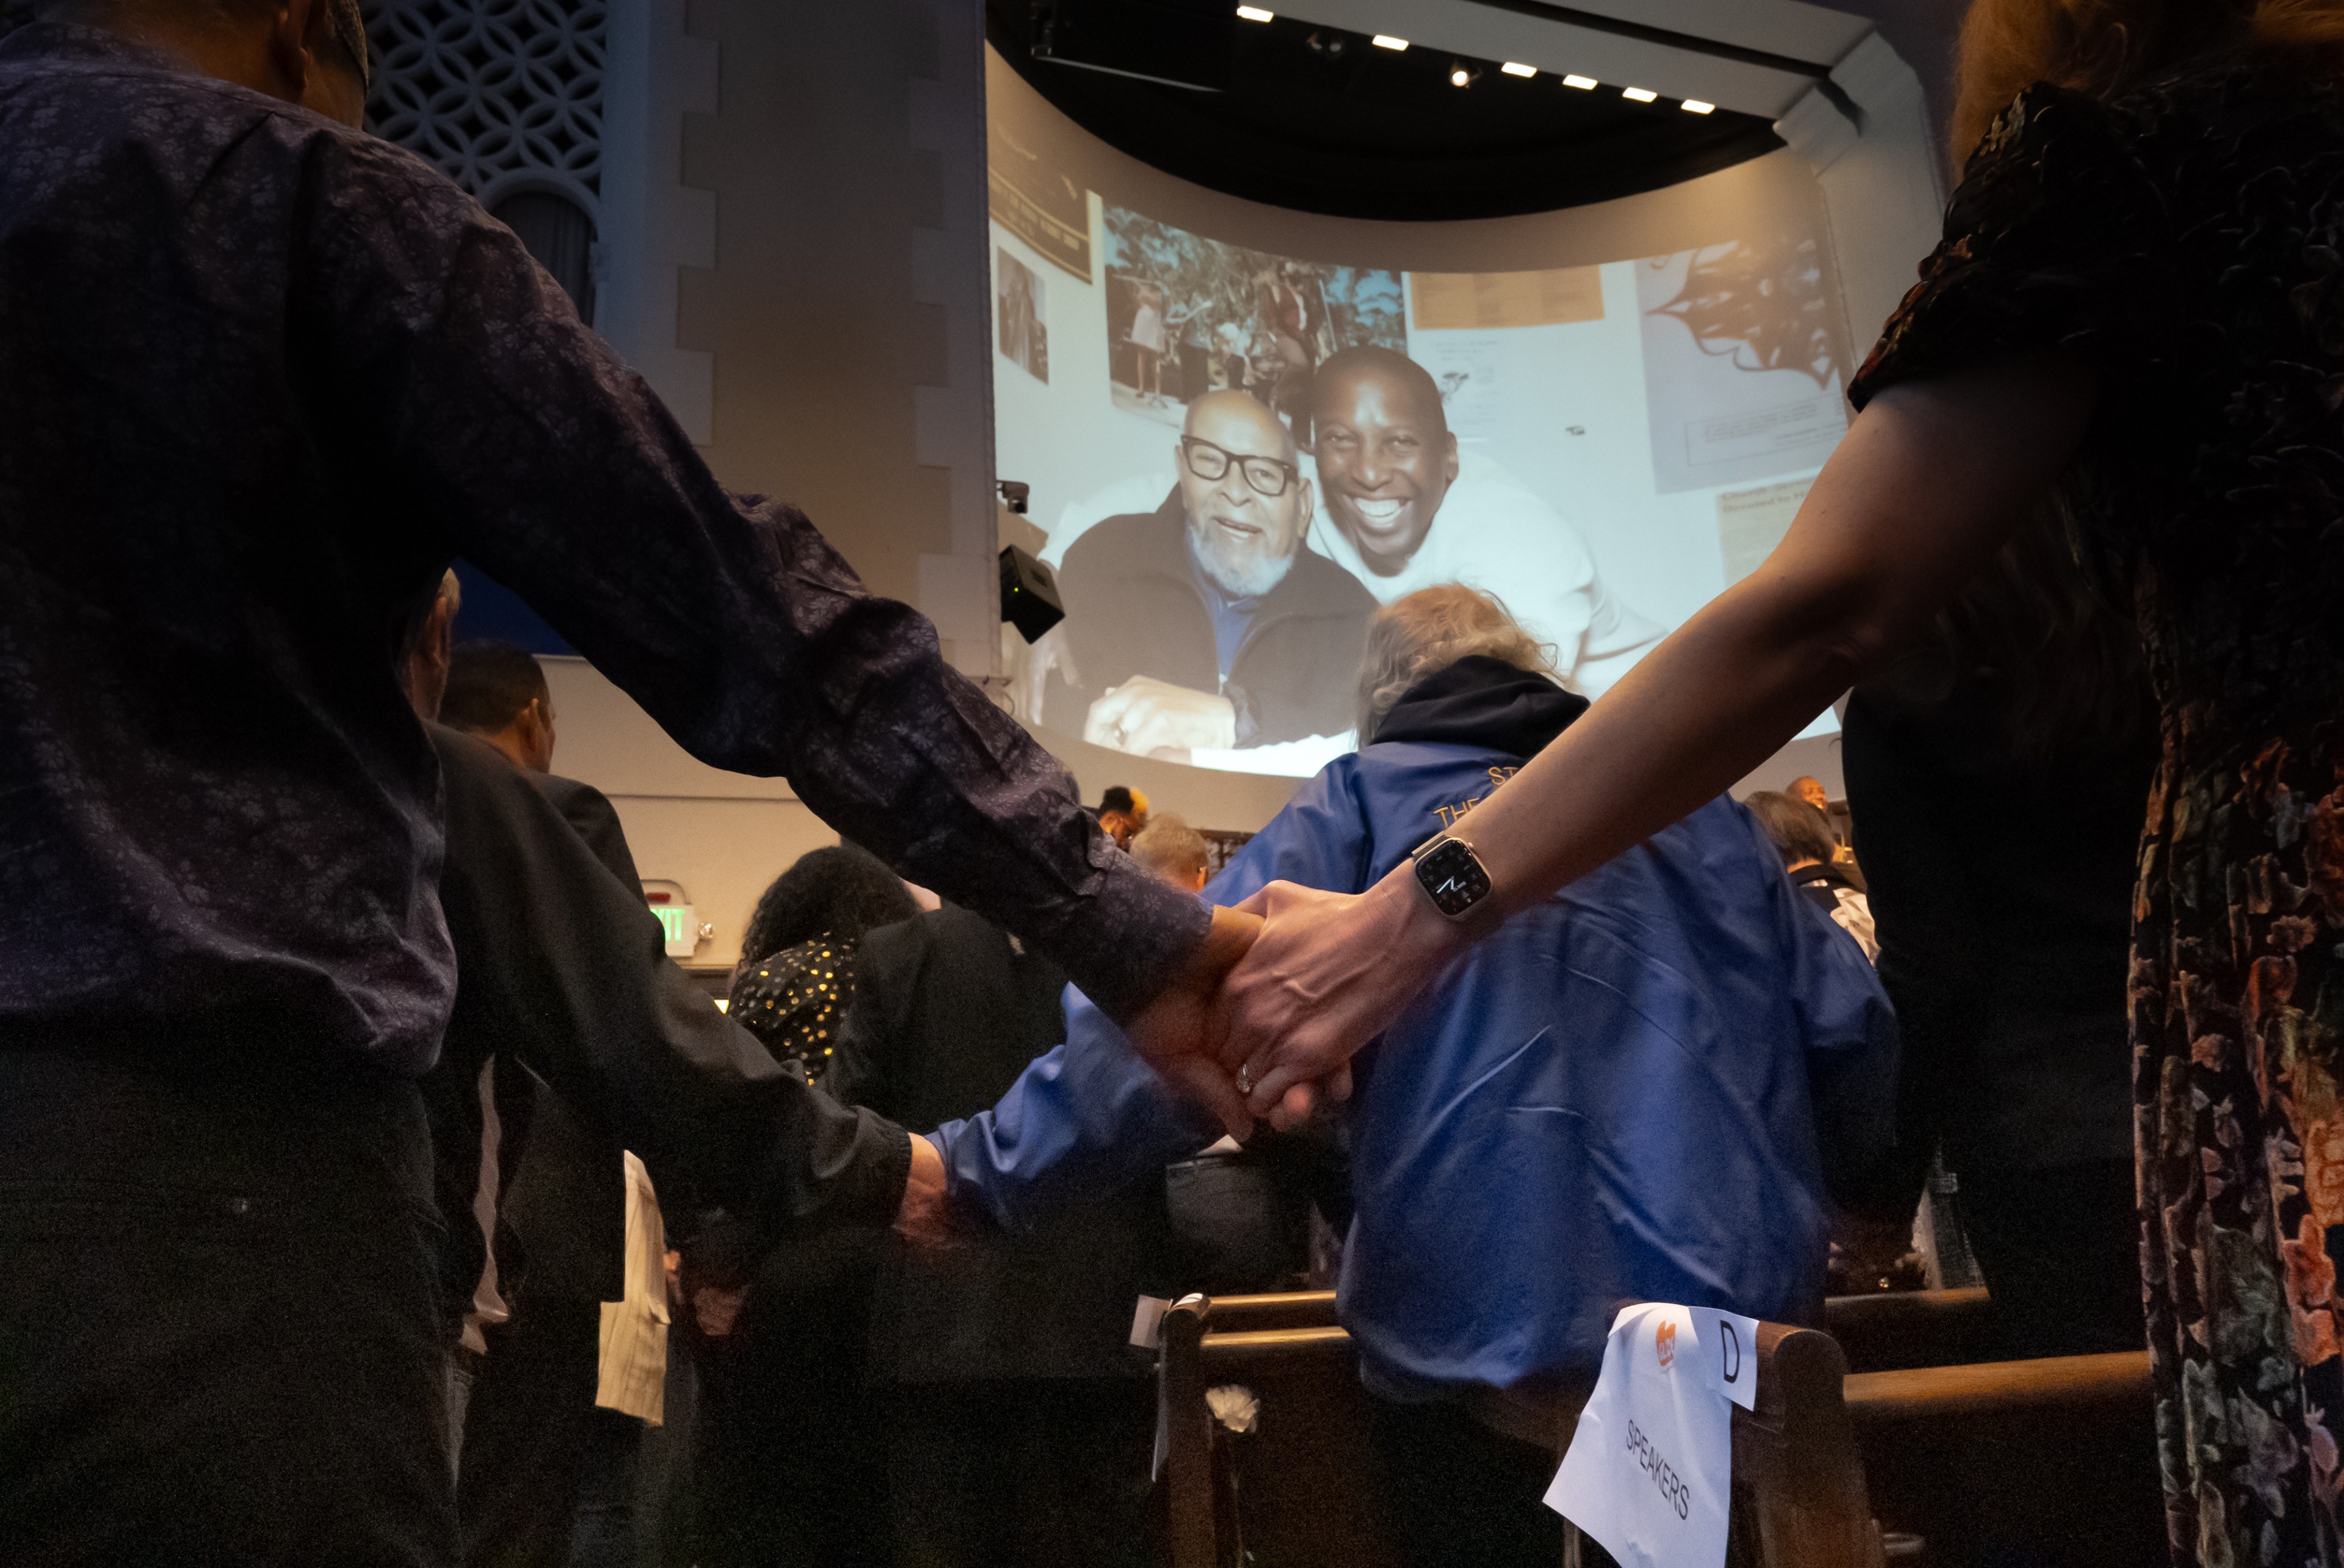 People holding hands at a service with a screen showing two smiling men.